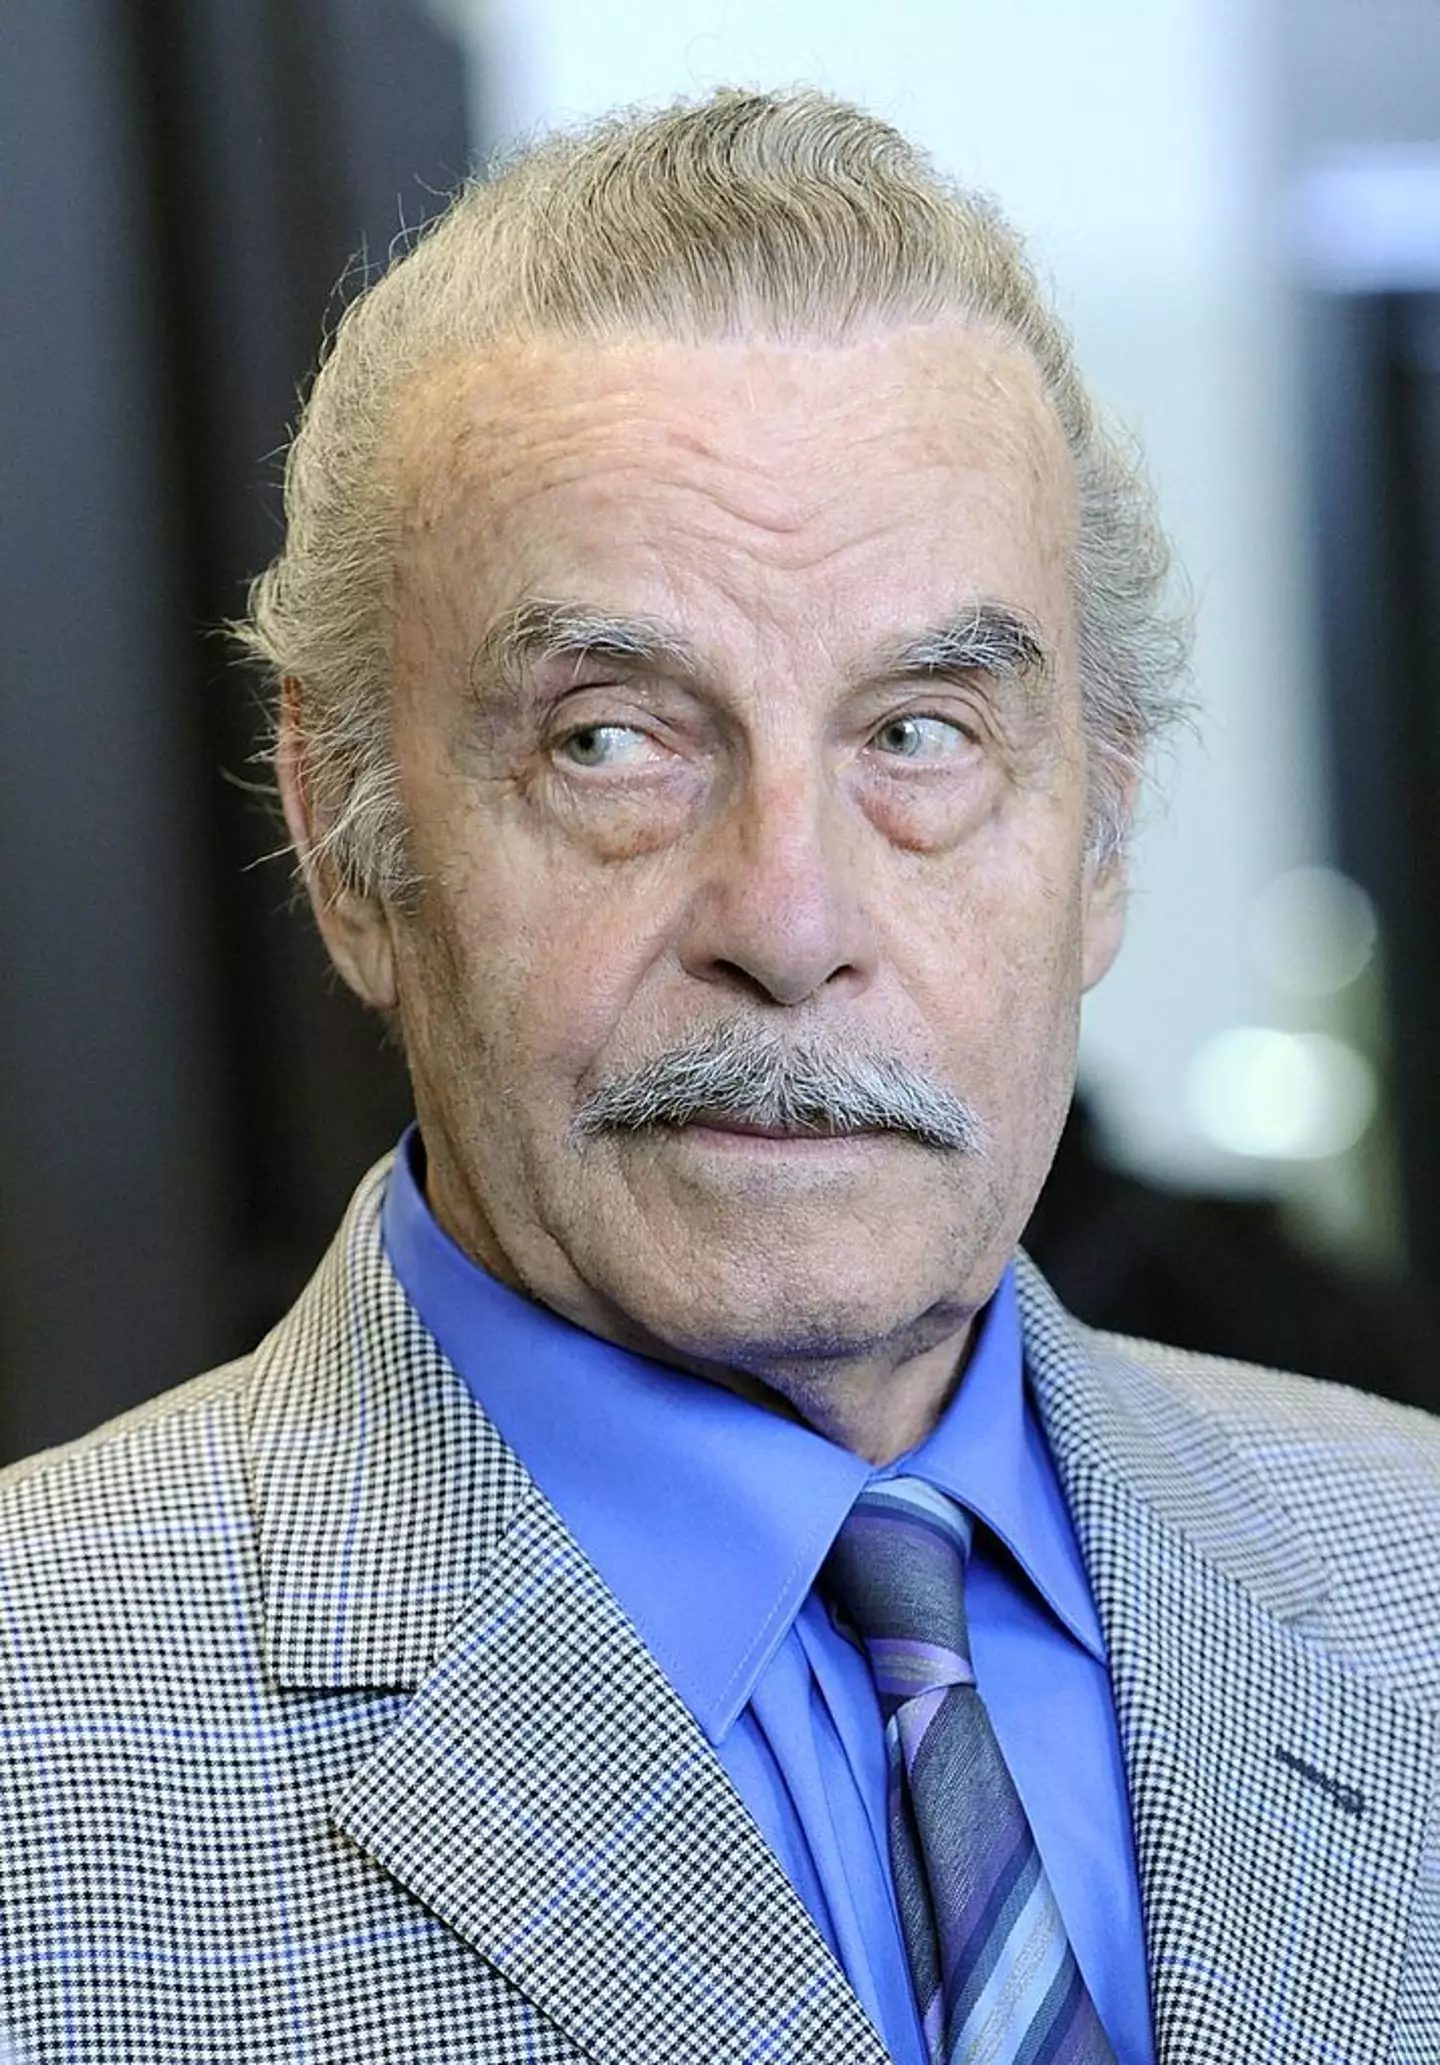 Josef Fritzl is currently serving life in prison.